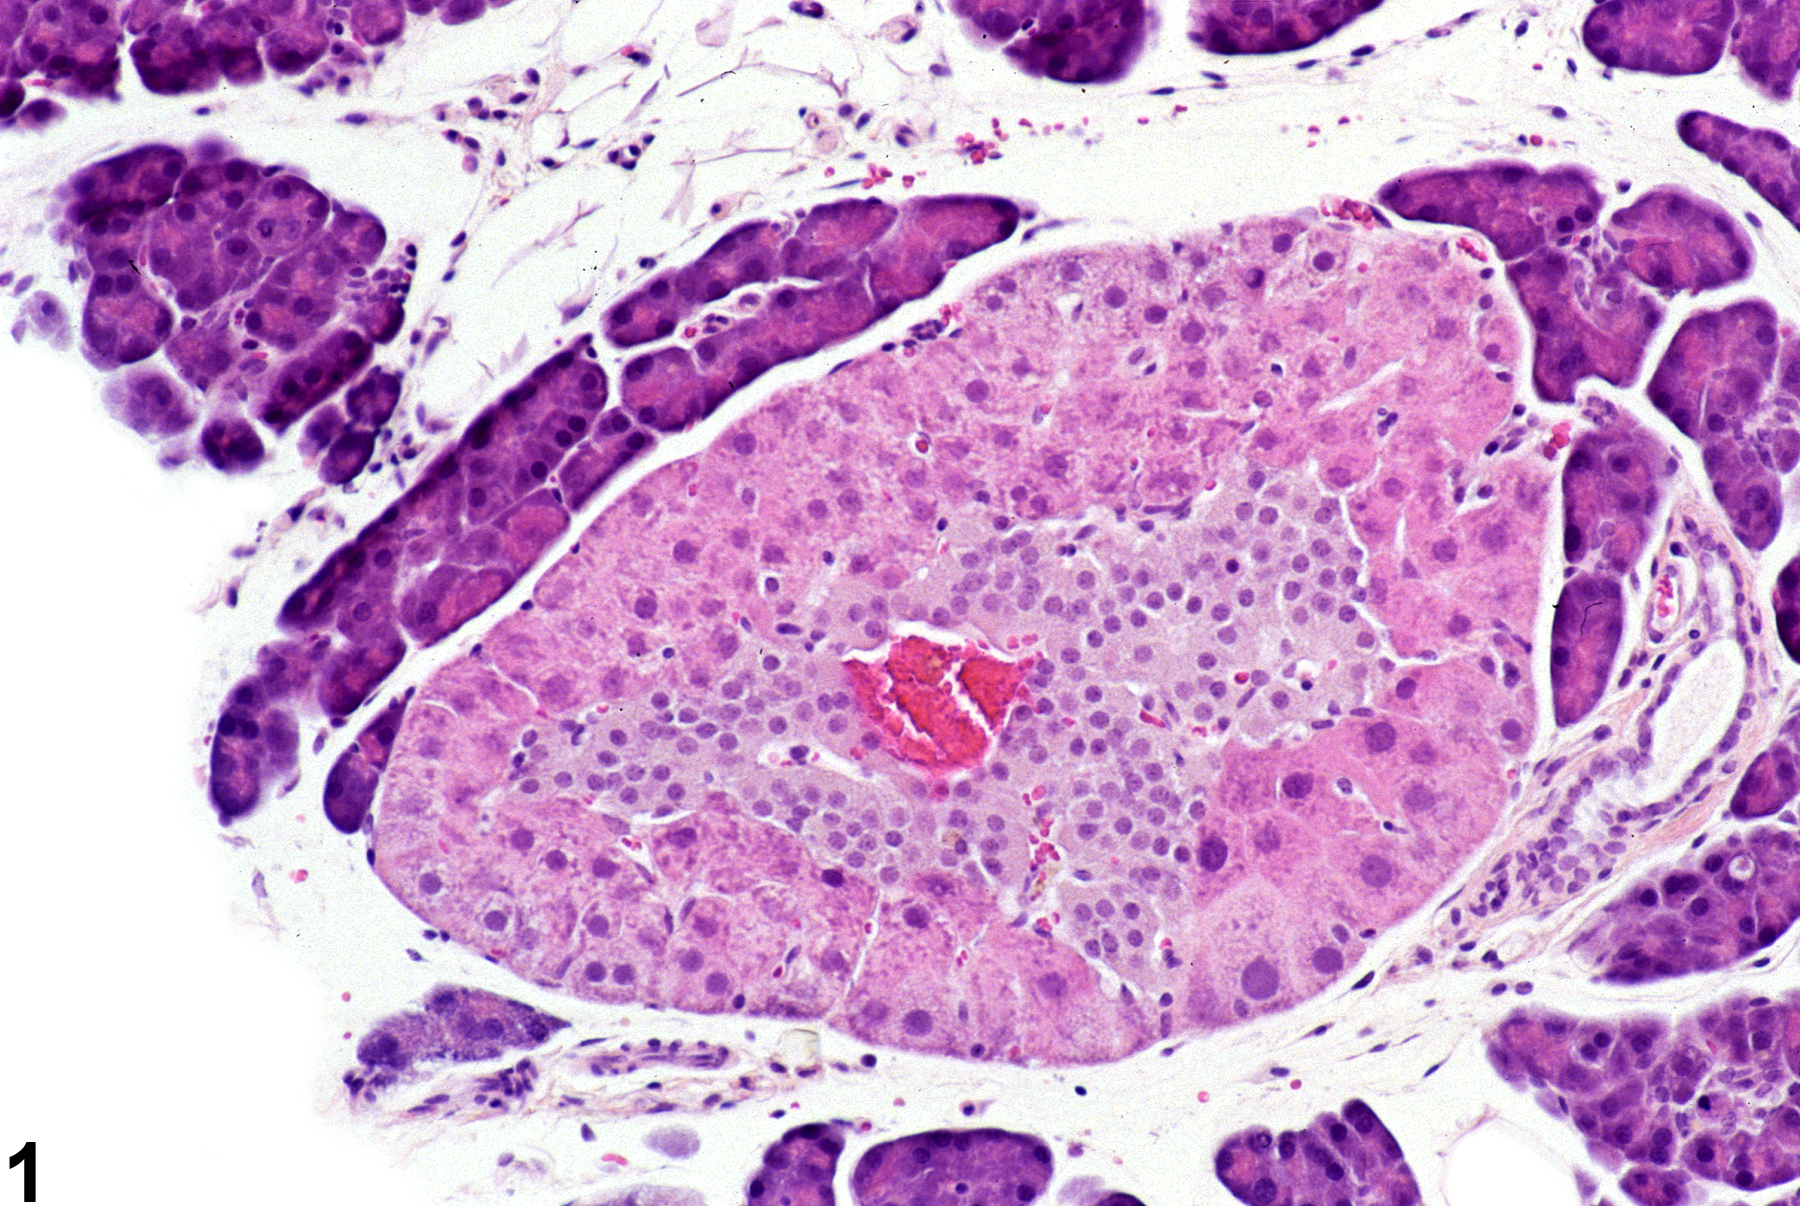 Image of metaplasia, hepatocyte in the pancreatic islet from a female F344/N rat in a subchronic study